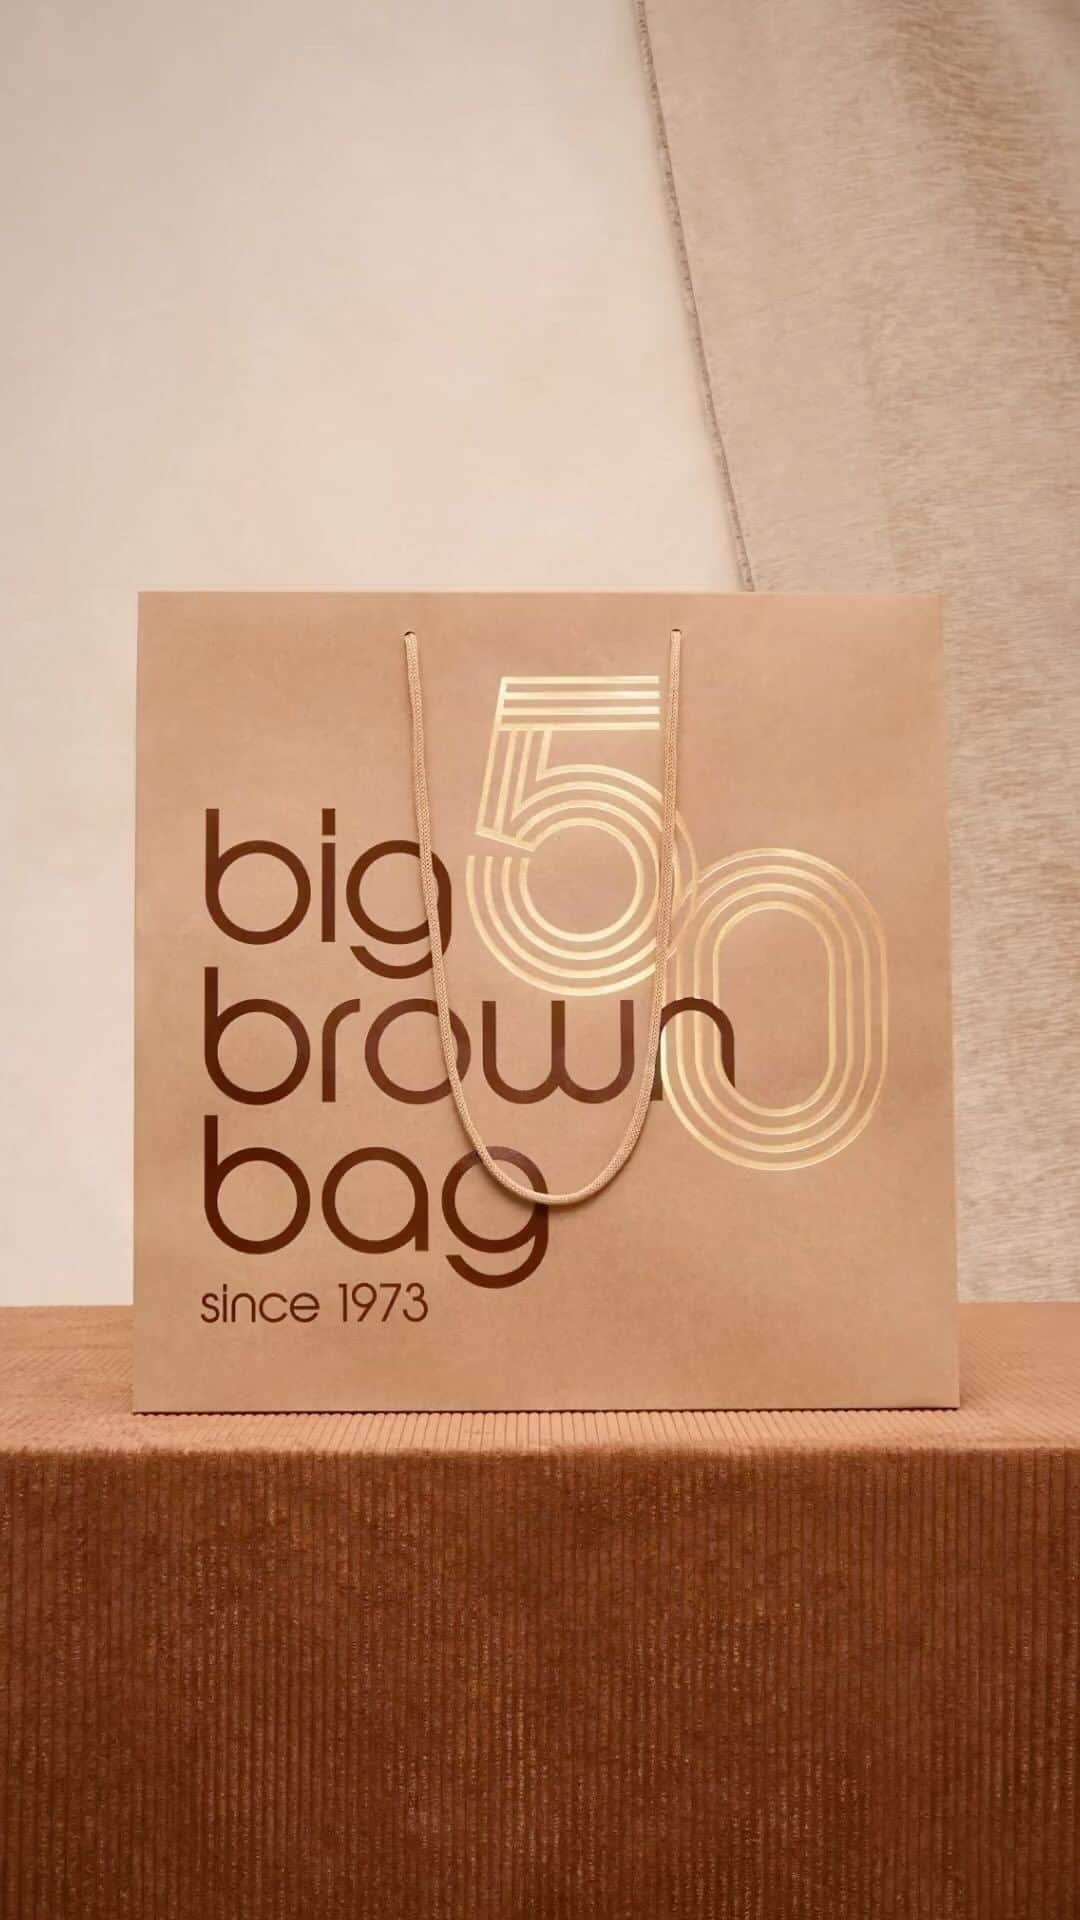 Bloomingdale'sのインスタグラム：「Our Big Brown Bag is turning the big 5-0! Did you know that it was designed by THE legendary Massimo Vignelli, whose work resides in the permanent collections of MoMA, The Met, and the Cooper Hewitt museum, just to name a few? The beloved bag first hit stores (and streets) in 1973. Impactful in its minimalism and sustainably made of kraft paper (long before it was en vogue), the Big Brown Bag remains one of the world’s most iconic shopping bags to this day. 🛍️ 🤎 🎉  To celebrate this milestone anniversary, we’d love to see your Brown Bags in the wild! Post a creative photo with the hashtag #bigbrownbag, then tag @bloomingdales for a chance to be featured on our feed.  And if you happen to be near our 59th Street flagship this Saturday, September 9, stop by for the Big Brown Bash! It’s a day filled with food, fun, exclusive new styles—and even some free gifts—throughout the store. 🤎」